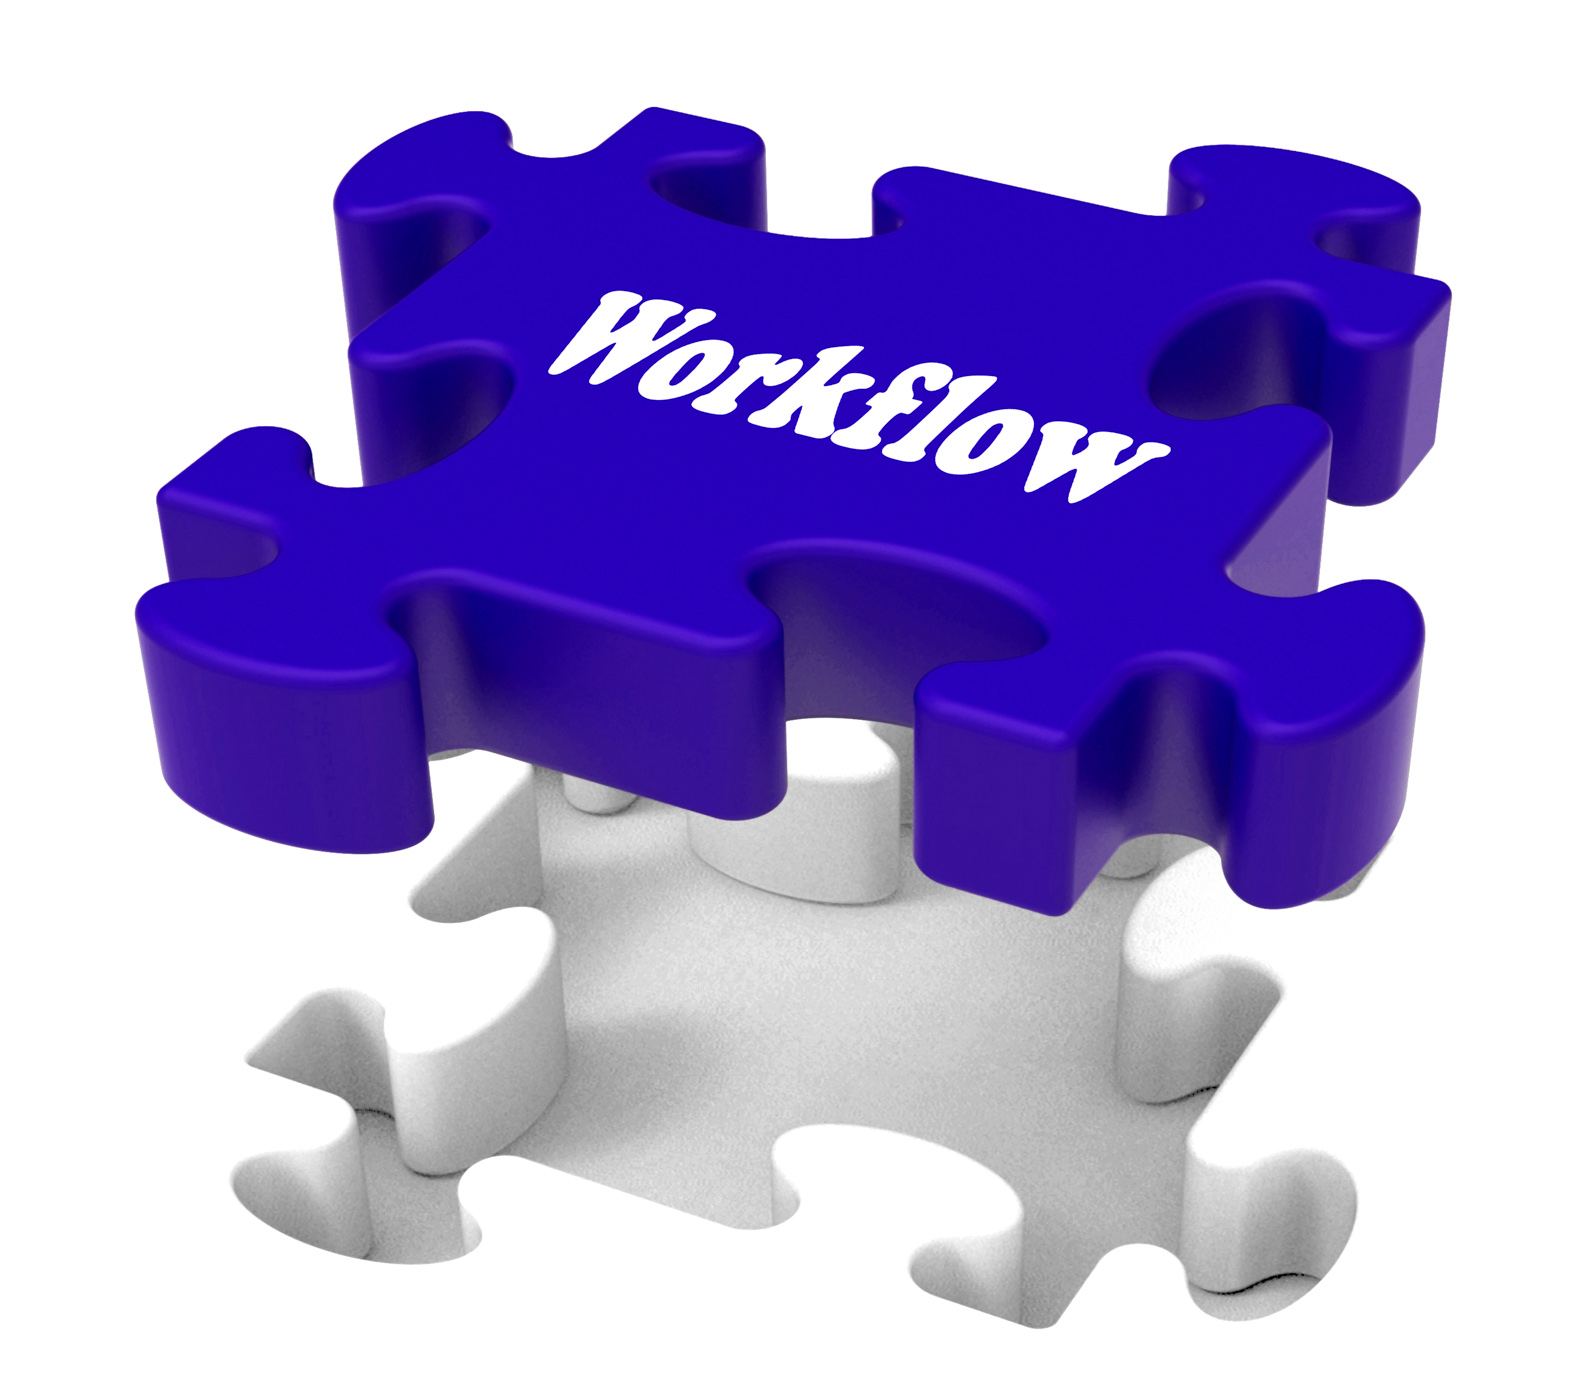 Workflow puzzle shows structure flow or work procedure photo